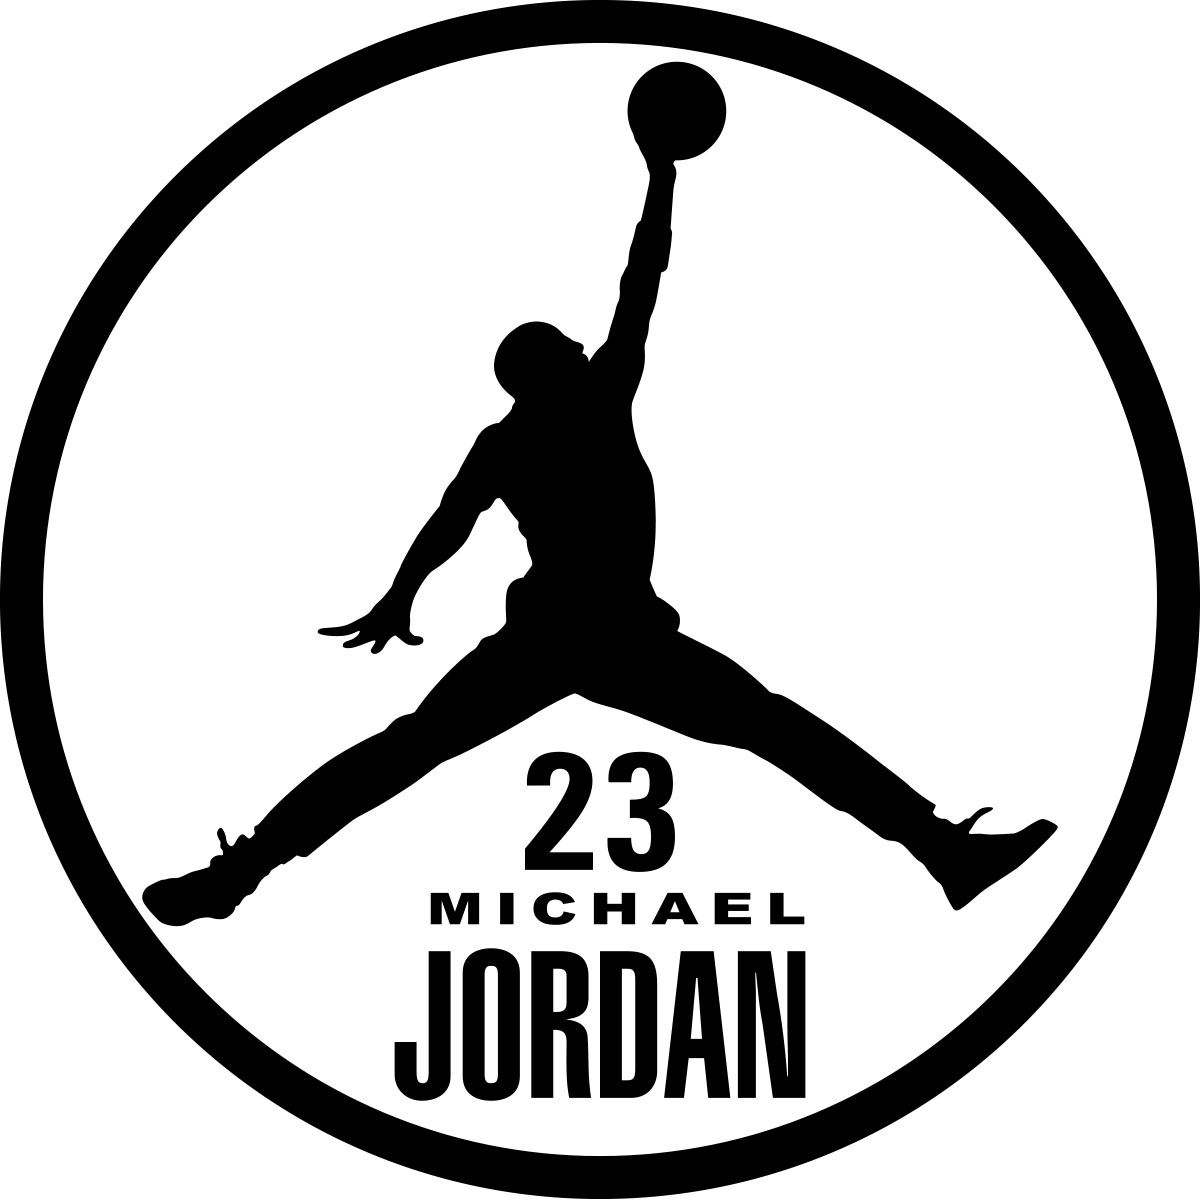 Prestige tæerne paperback Wall decal Silhouette Michael Jordan - Wall Decal WALL DECAL MUSICA &  CINEMA Silhouettes - ambiance-sticker